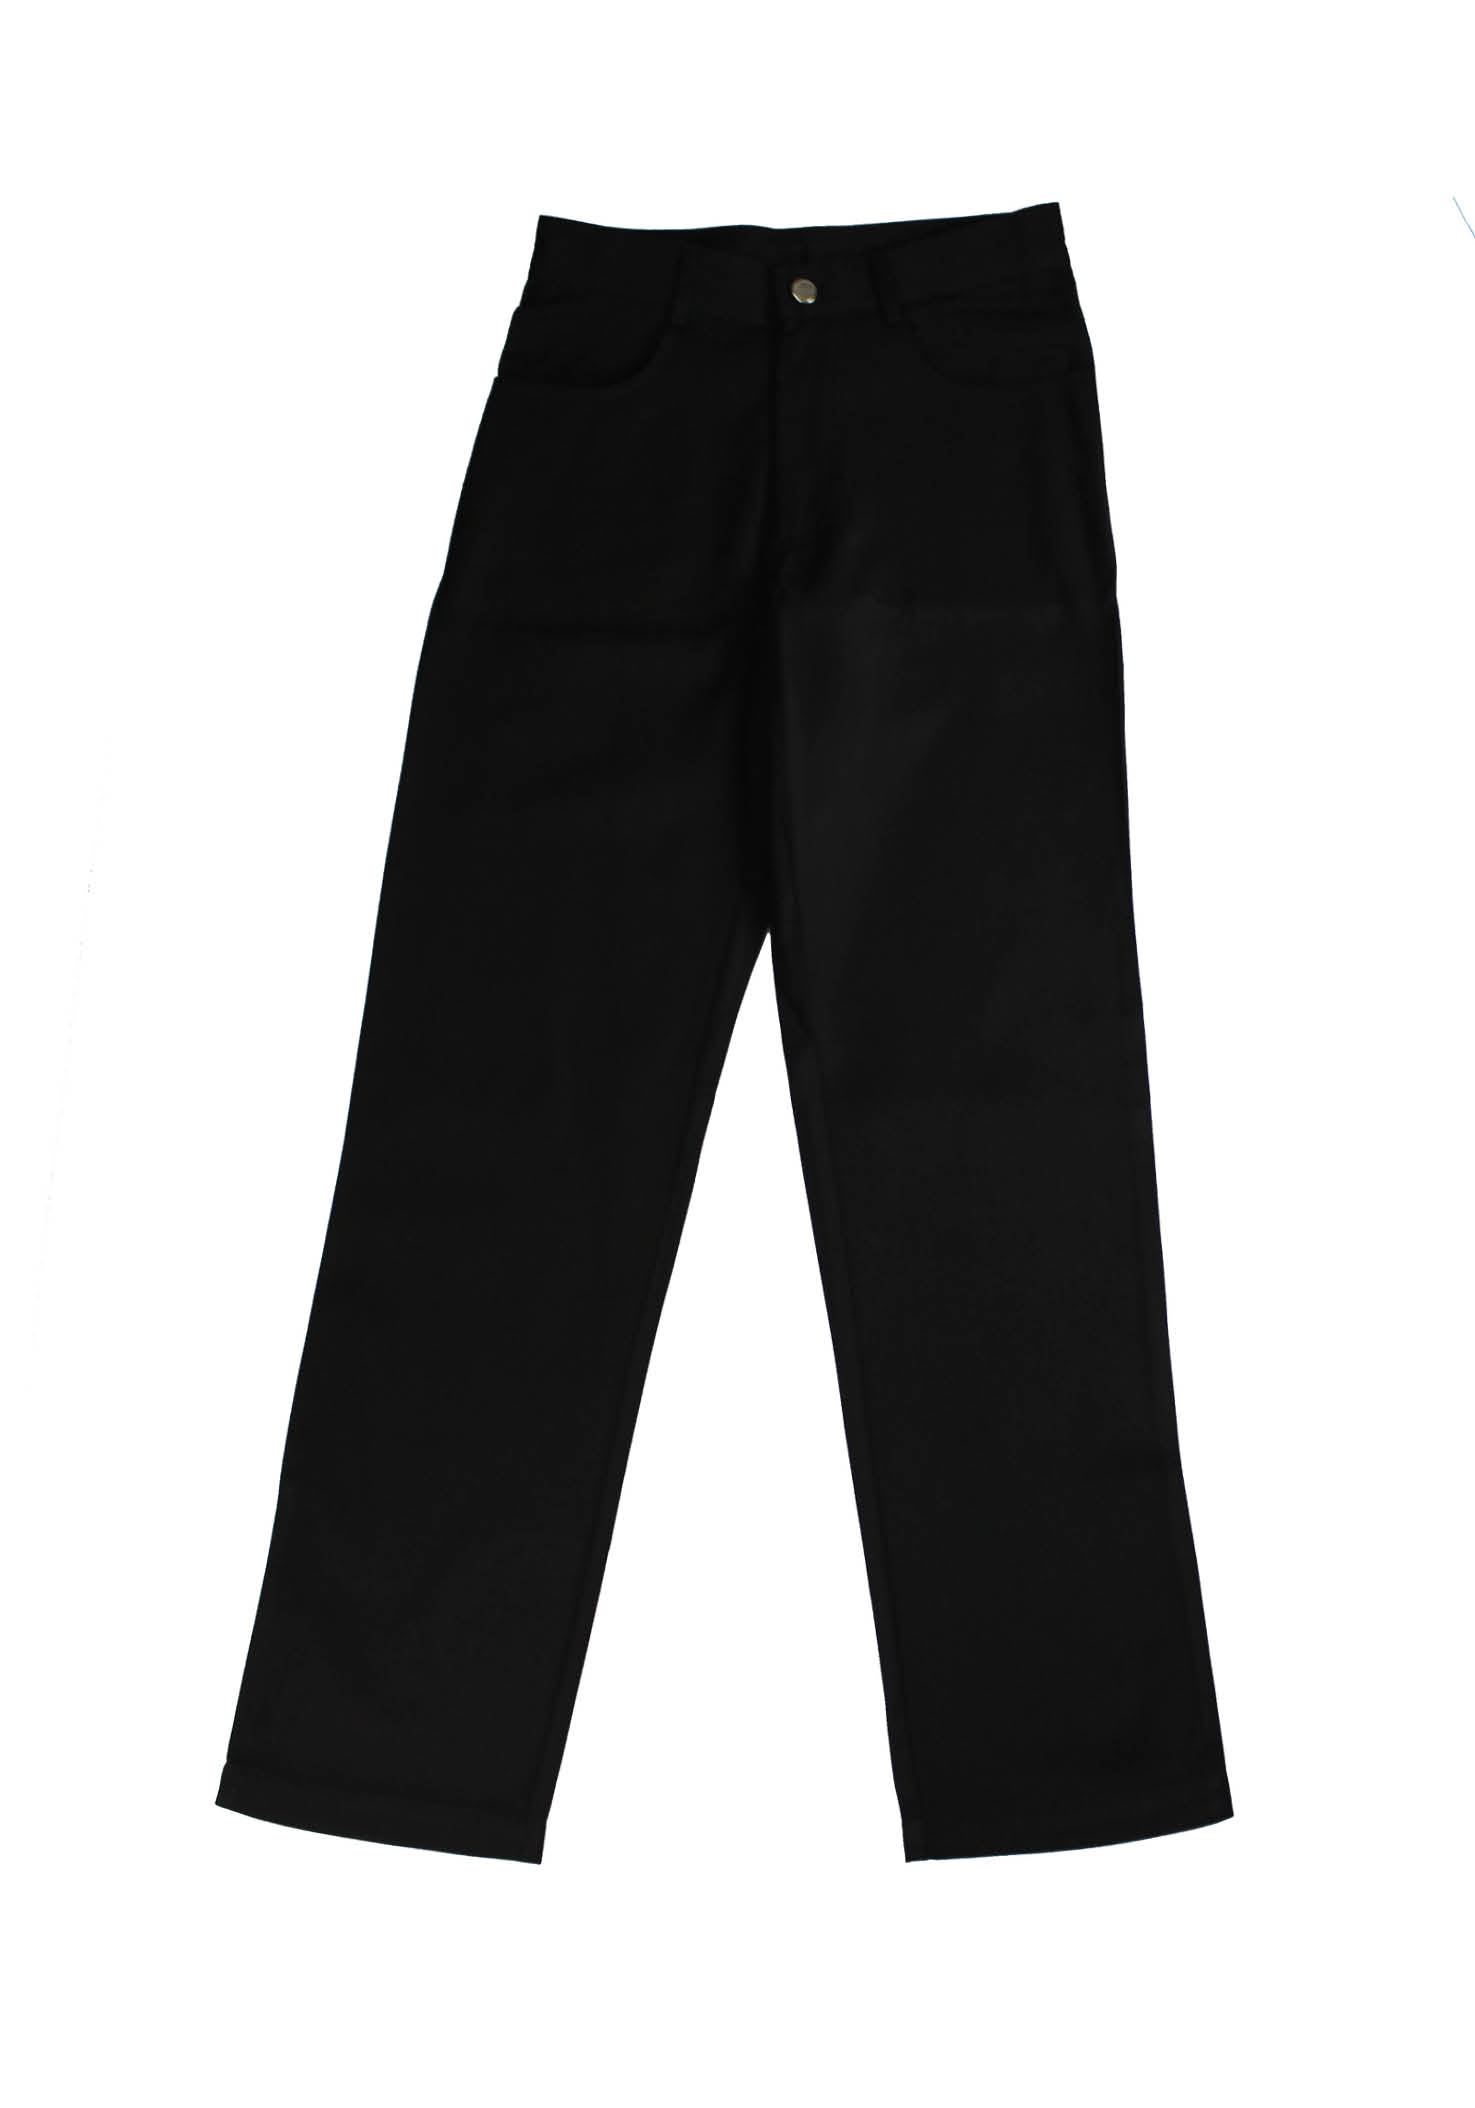 Freshwater Unisex Tailored Black Pants | Shop at Pickles Schoolwear ...